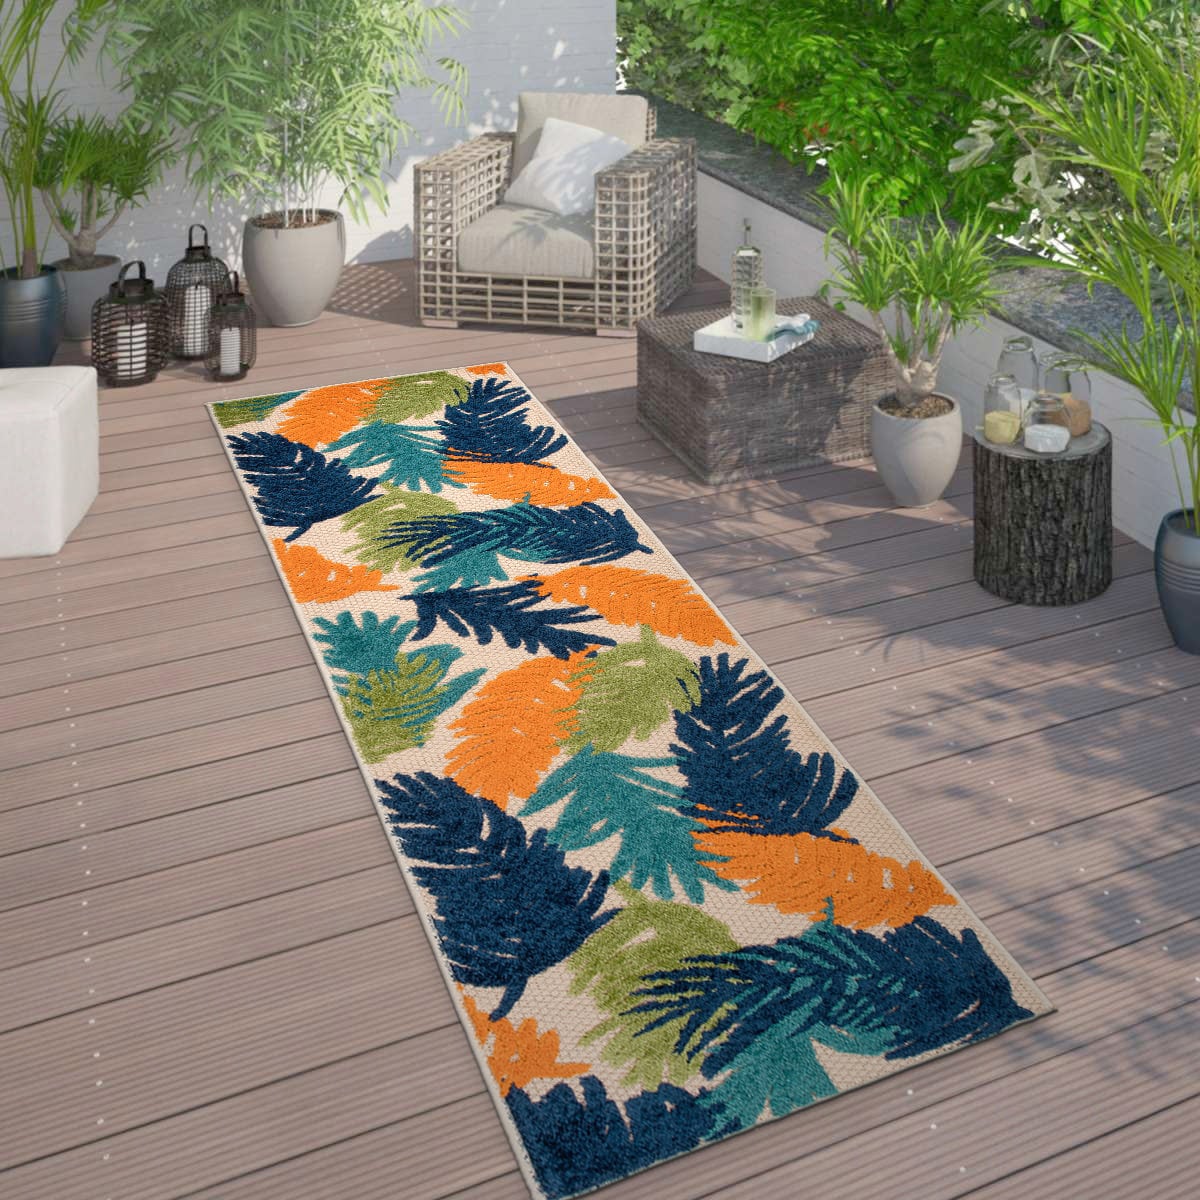 5x7 Water Resistant, Indoor Outdoor Rugs for Patios, Front Door Entry,  Entryway, Deck, Porch, Balcony | Outside Area Rug for Patio | Gray, Floral  